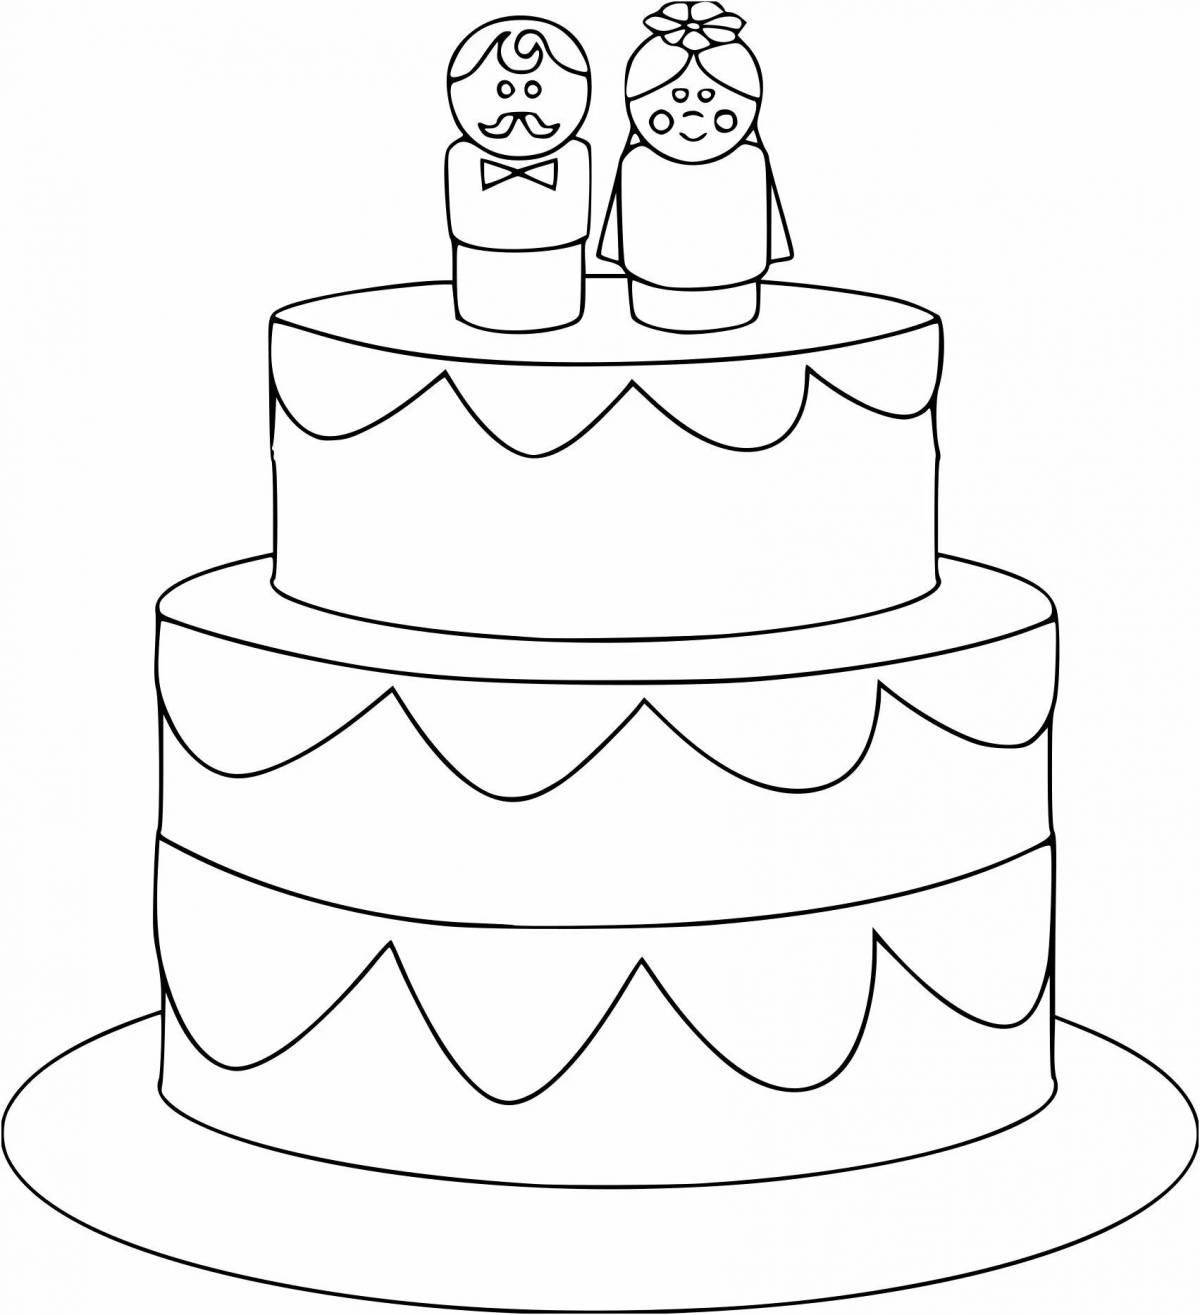 Sparkling cake coloring book for kids